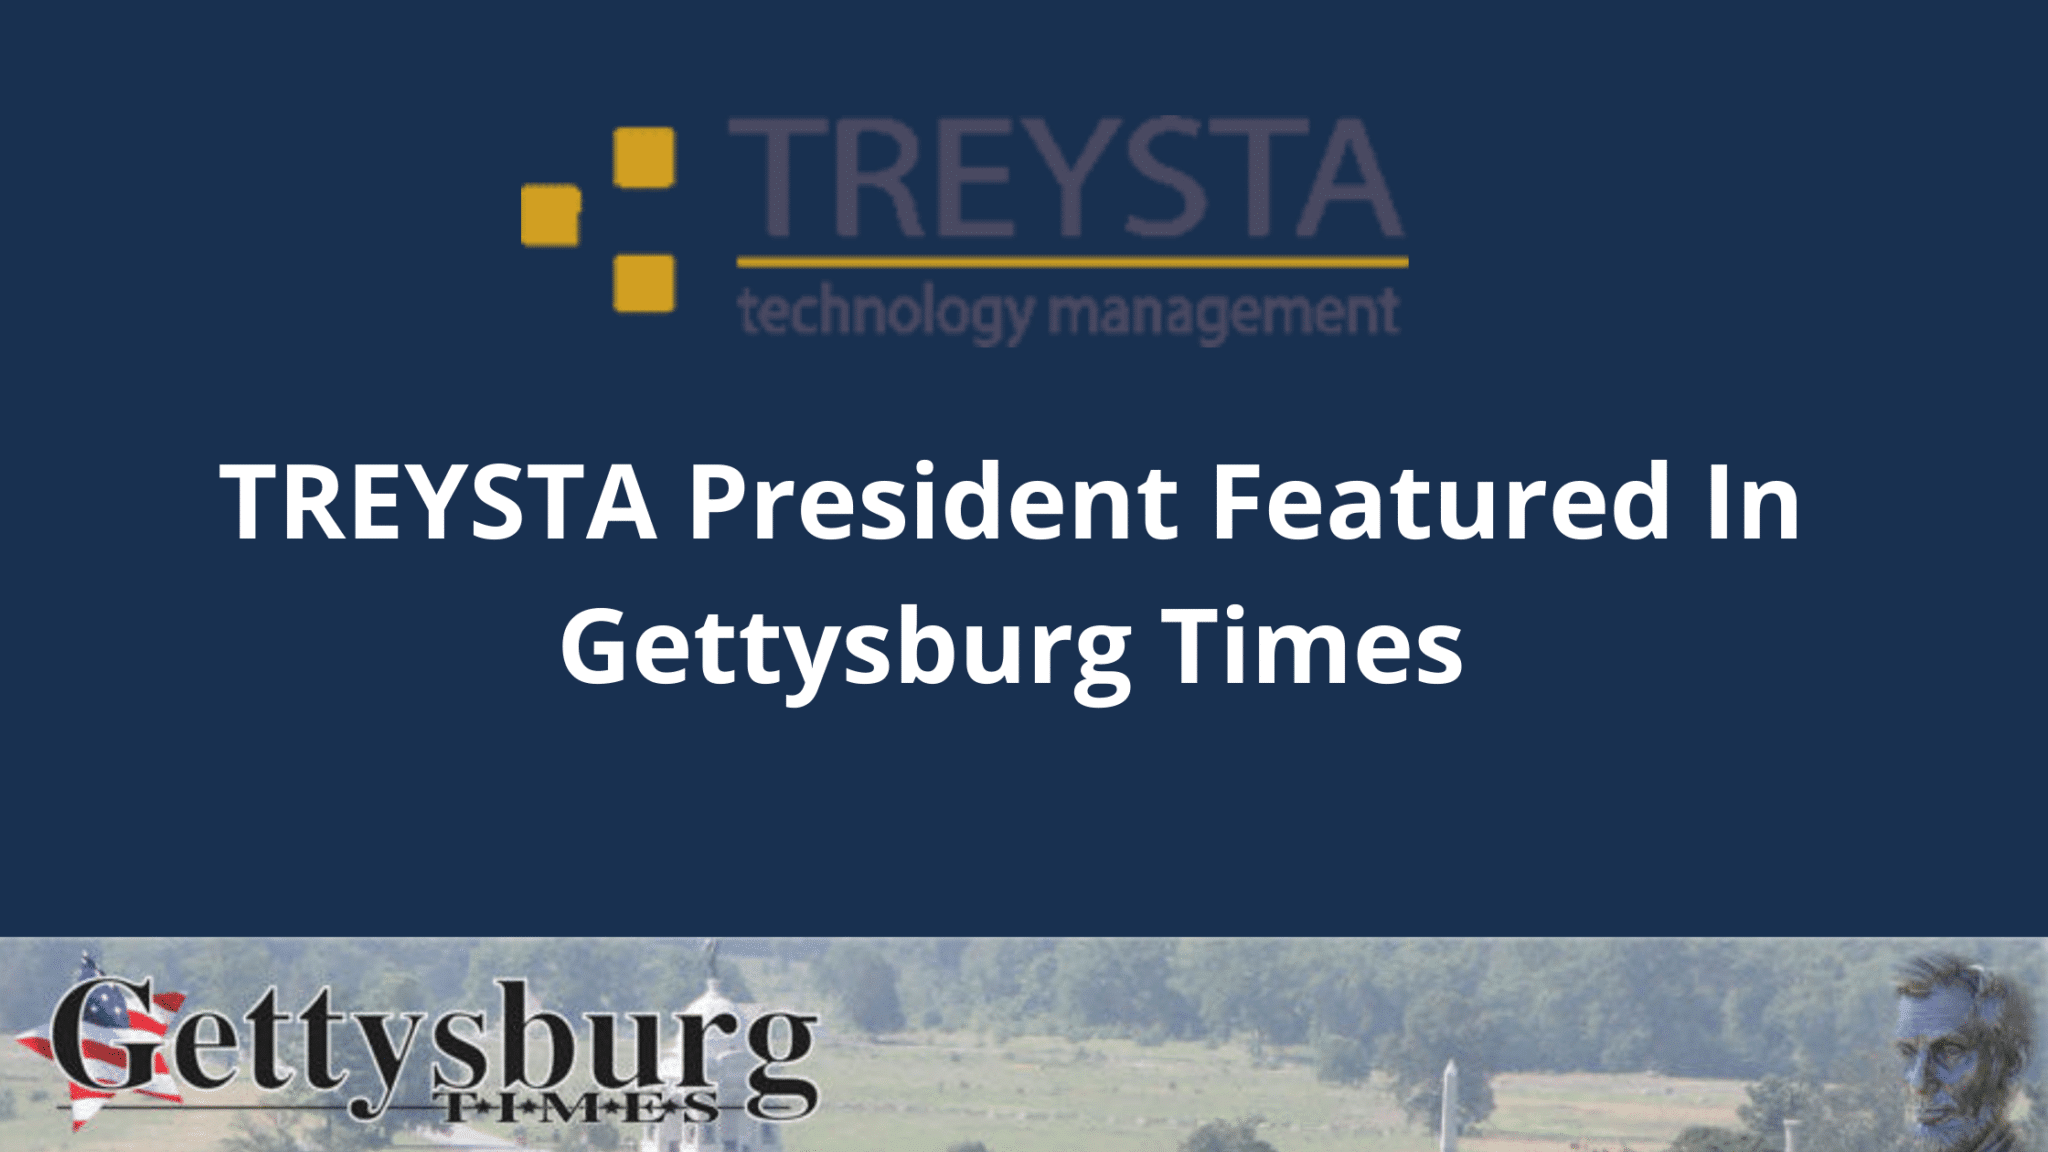 TREYSTA President Featured In Gettysburg Times — How Well Do You Know Your IT Team?